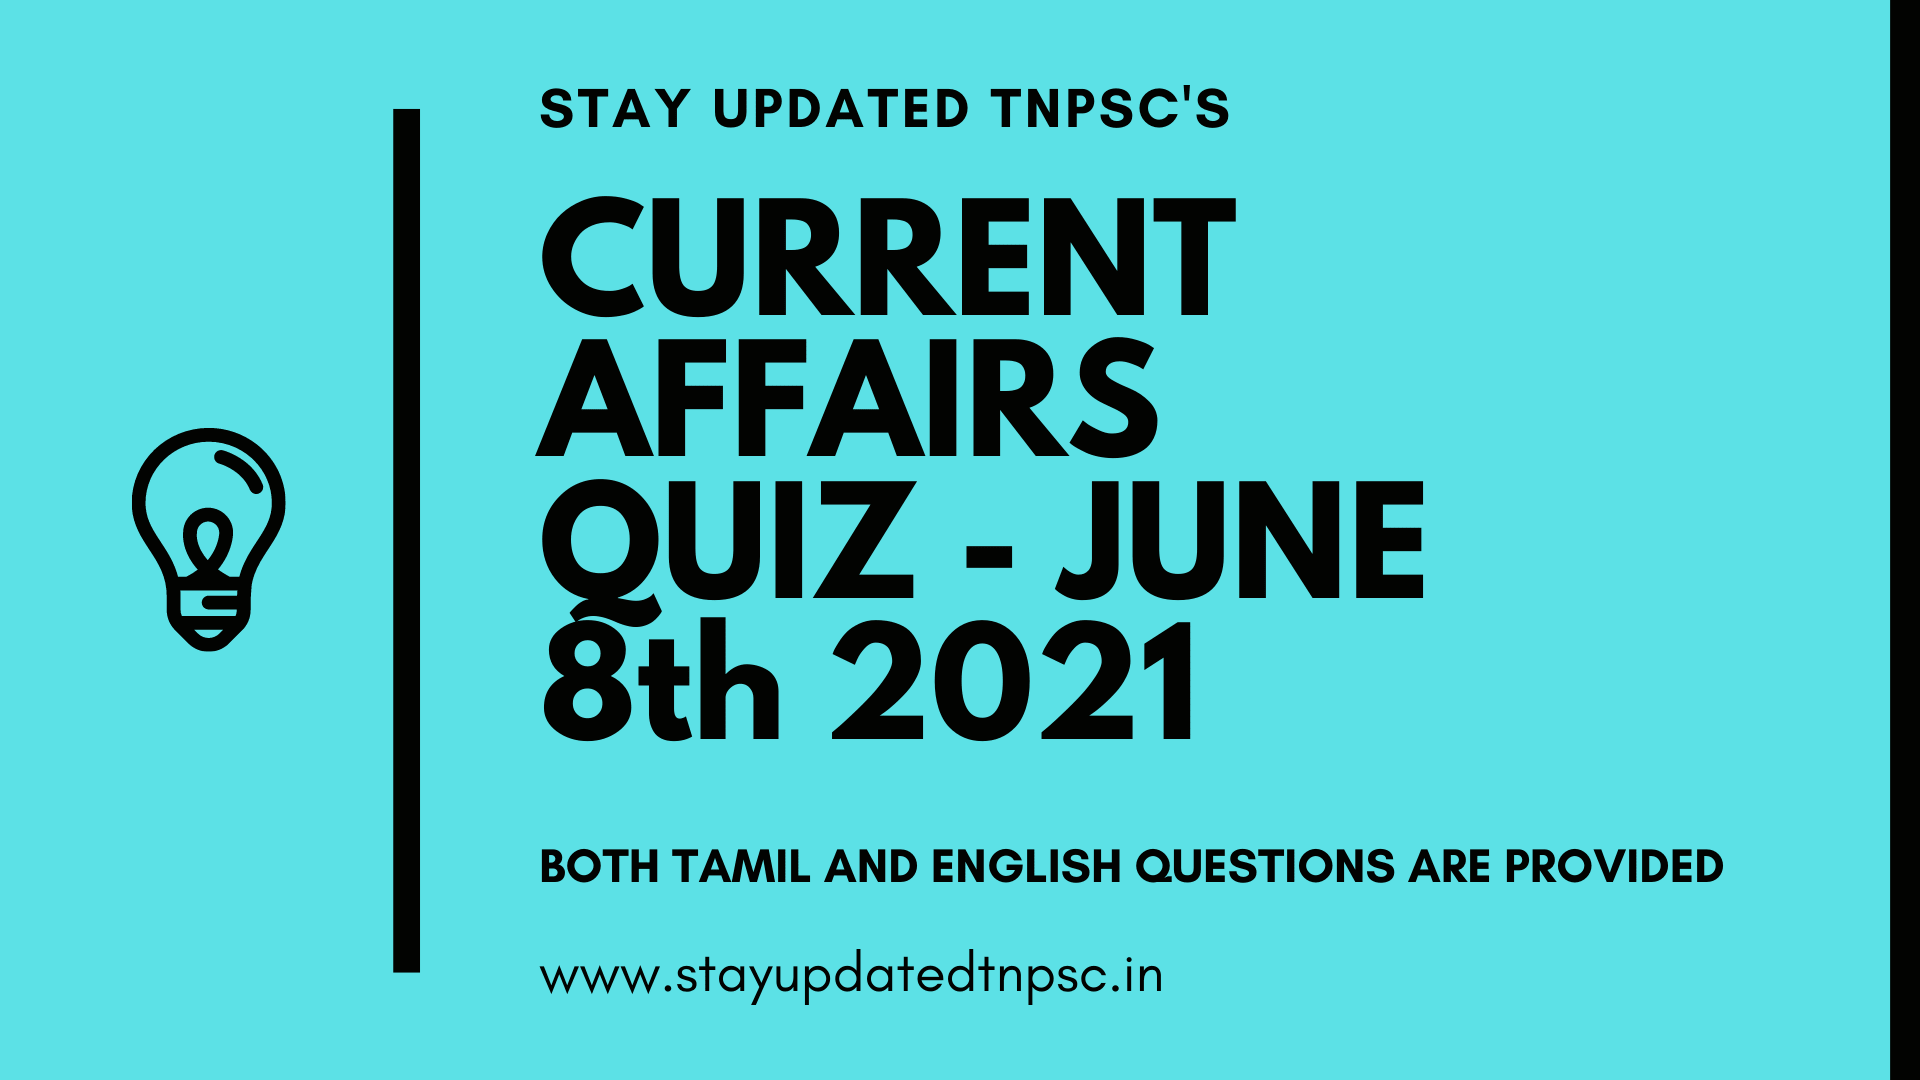 TNPSC DAILY CURRENT AFFAIRS: 08 JUNE 2021